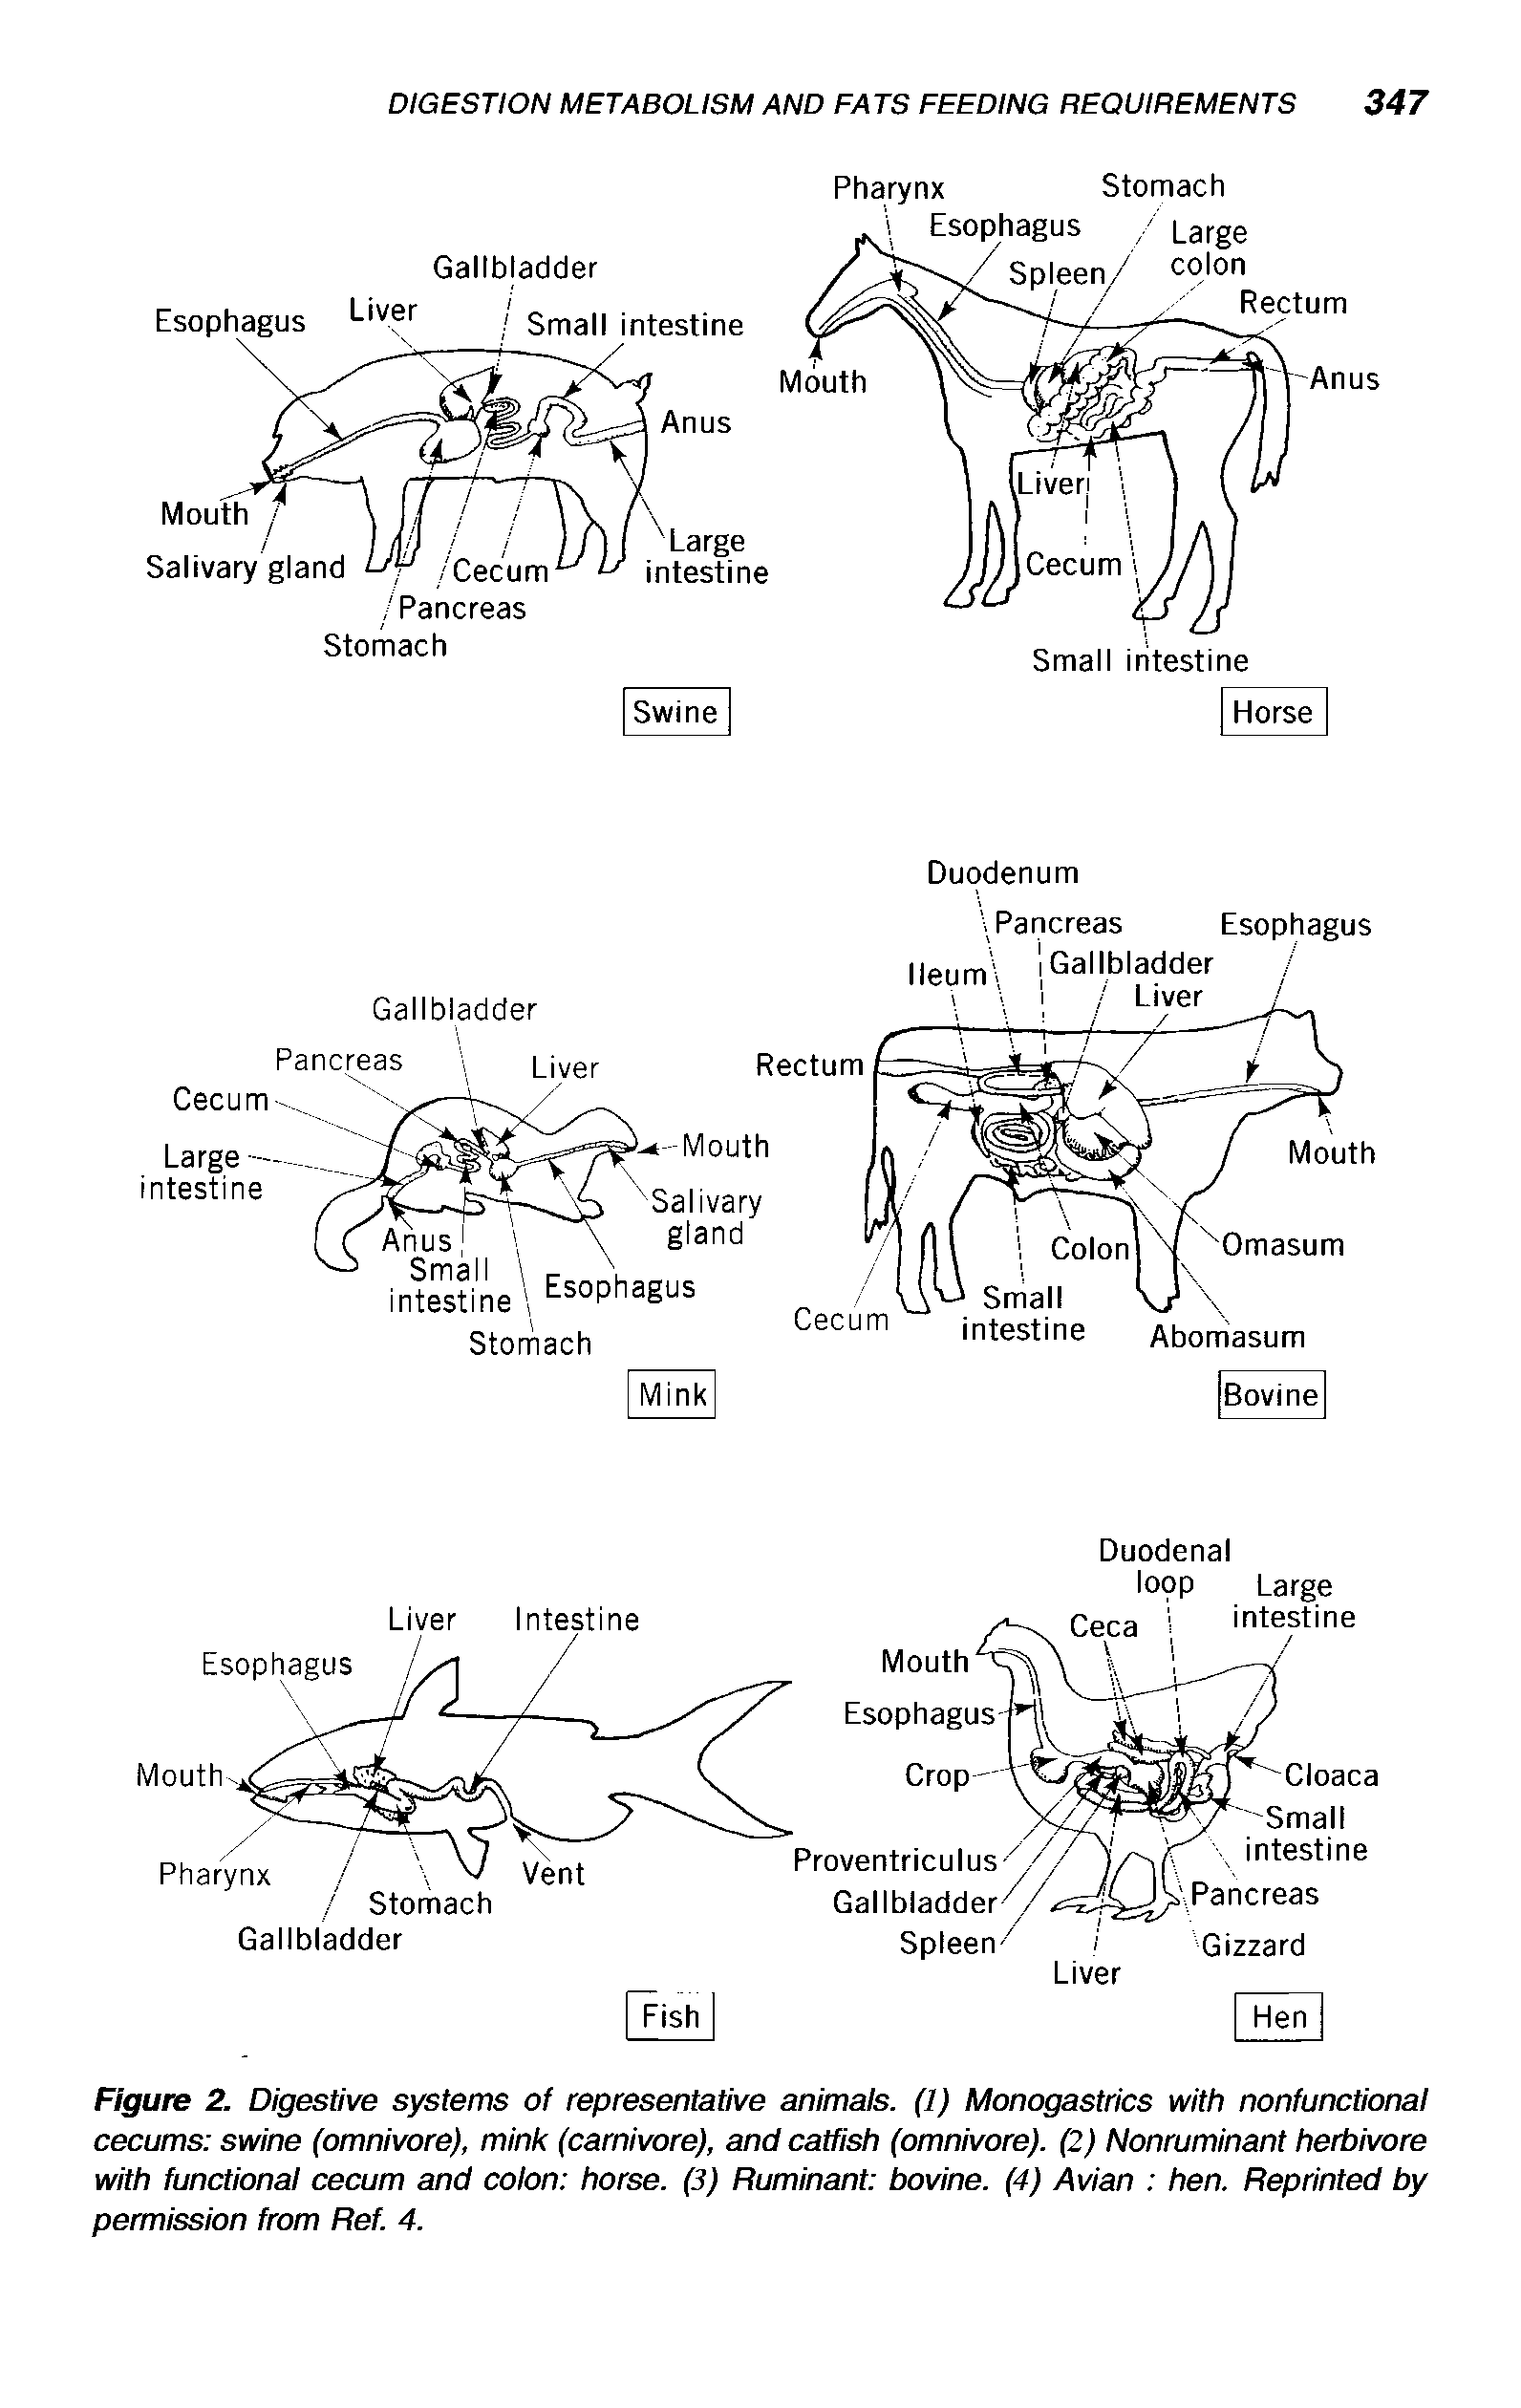 Figure 2. Digestive systems of representative animals. (1) Monogastrics with nonfunctional cecums swine (omnivore), mink (carnivore), and catfish (omnivore). (2) Nonruminant herbivore with functional cecum and colon horse. (3) Ruminant bovine. (4) Avian hen. Reprinted by permission from Ref. 4.